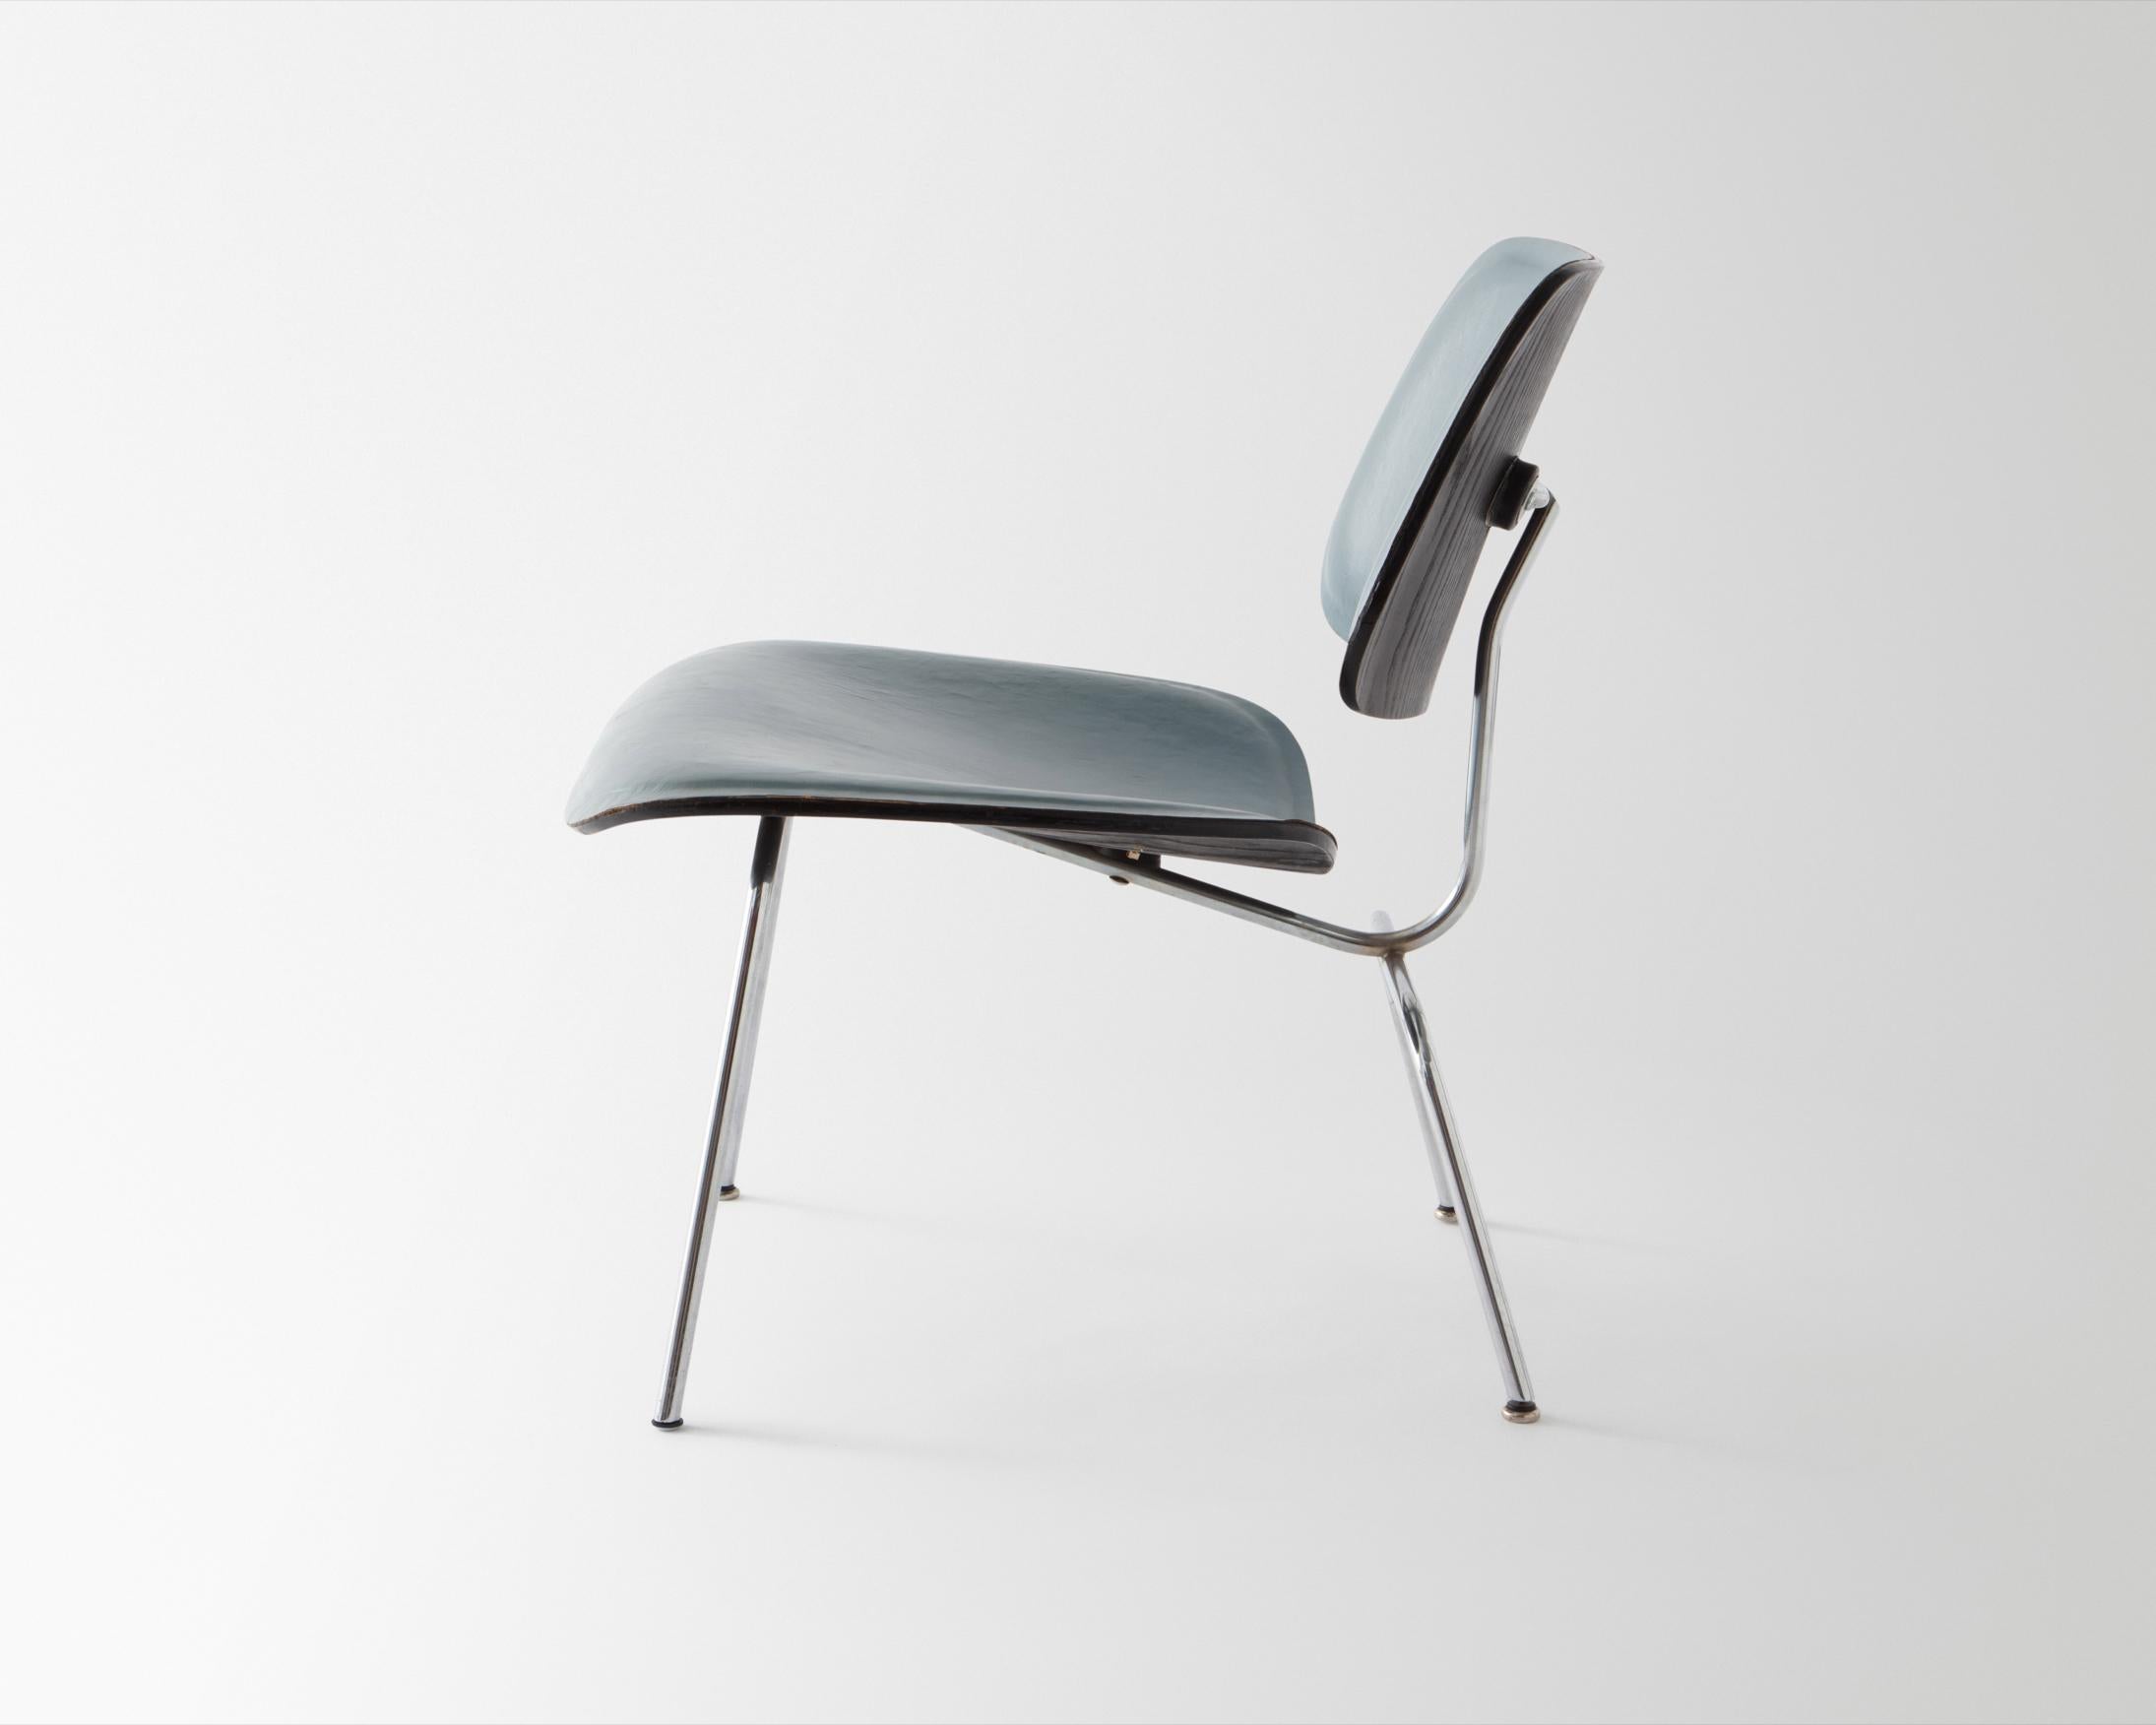 LCM (Lounge Chair Metal). Designed 1946. Manufactured by Herman Miller, Zeeland, Michigan, circa 1951-1956. Molded ash plywood with original black aniline dye finish and original blue leather upholstery, chrome-plated steel, rubber shock mounts